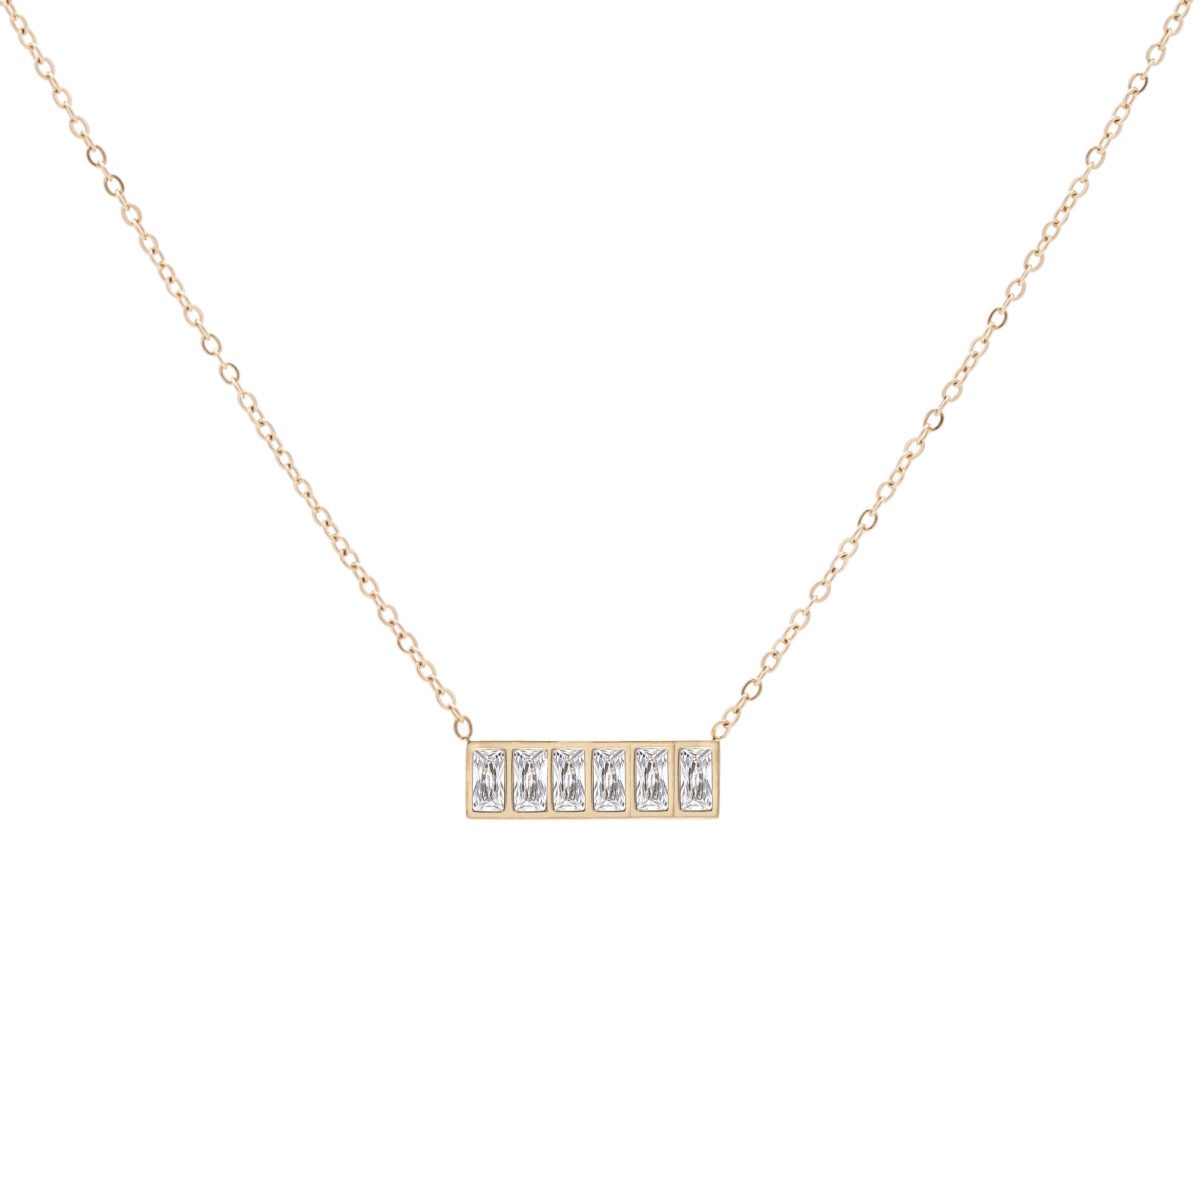 https://m.clubbella.co/product/solitaire-bar-necklace/ GALA BAR NECKLACE (2)